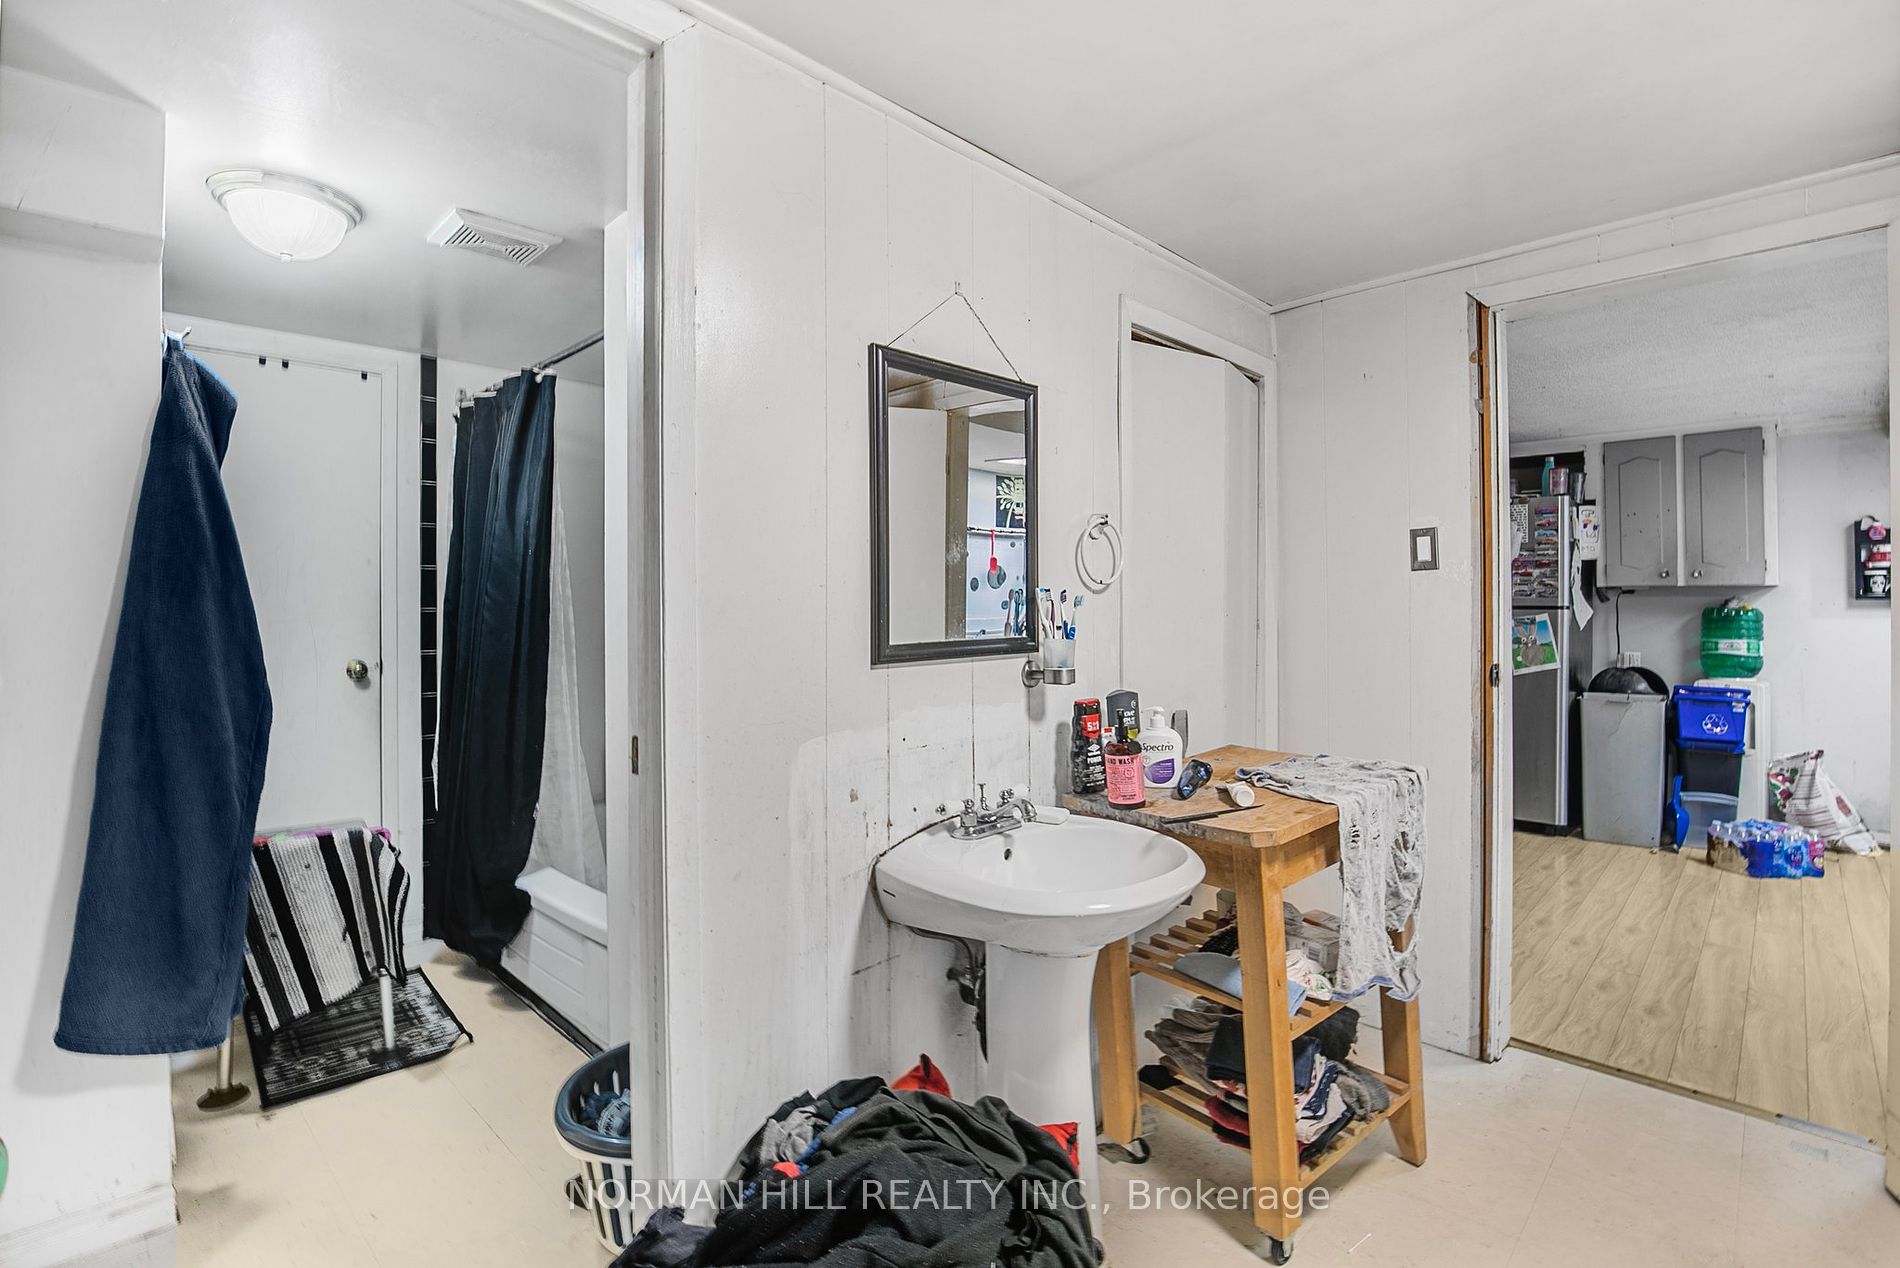 Property Images